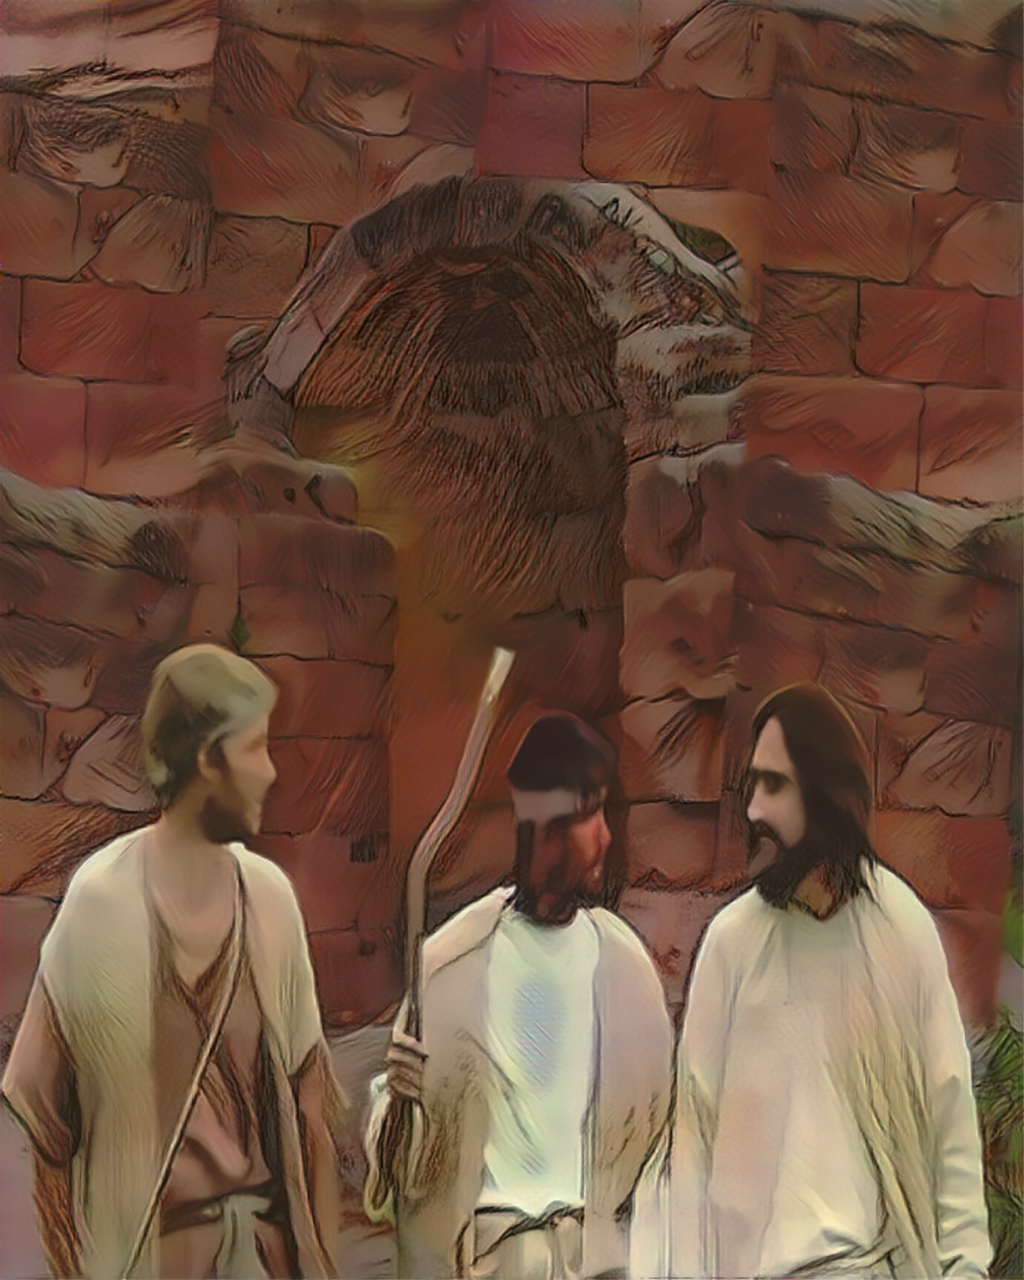 Jesus and the two disciples outside an arched entryway as they ask him to stay with them and share a meal.